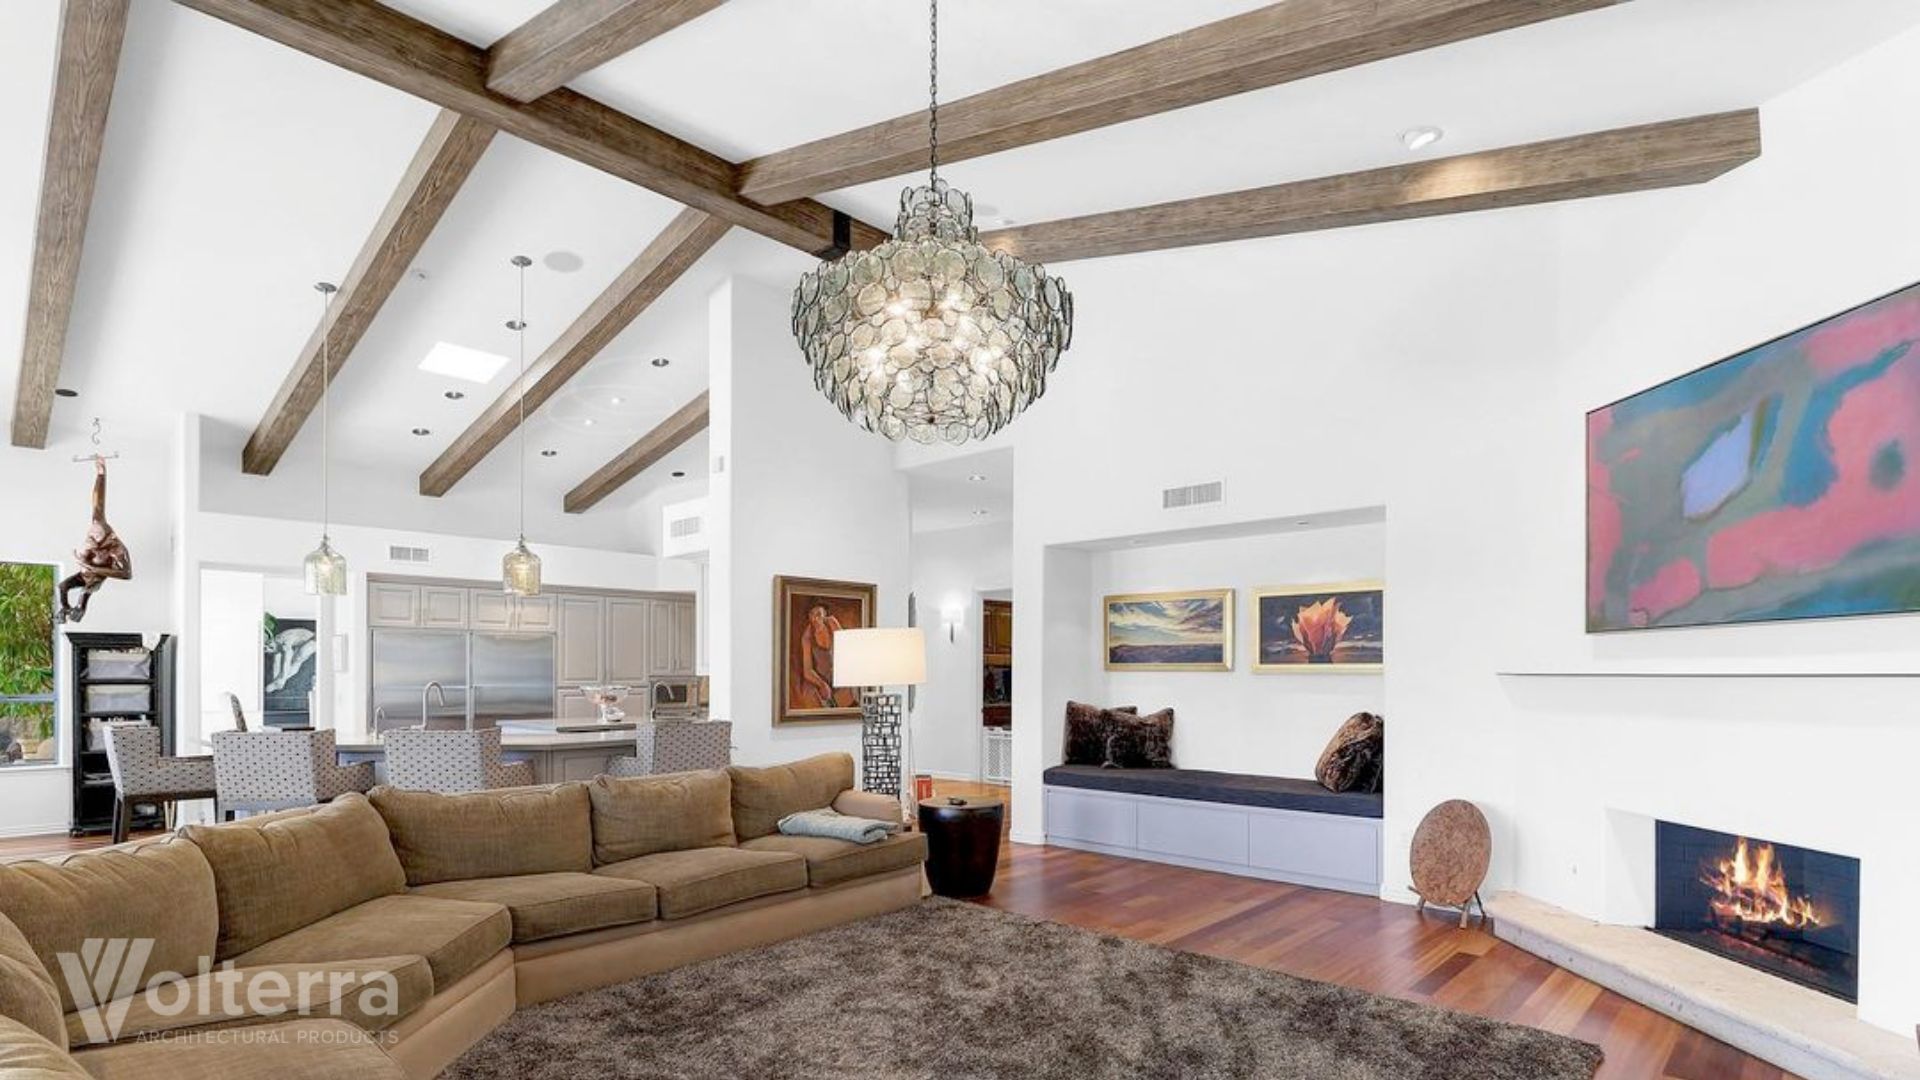 How Decorative Wood Beams Can Revitalize Your Living Room Aesthetics